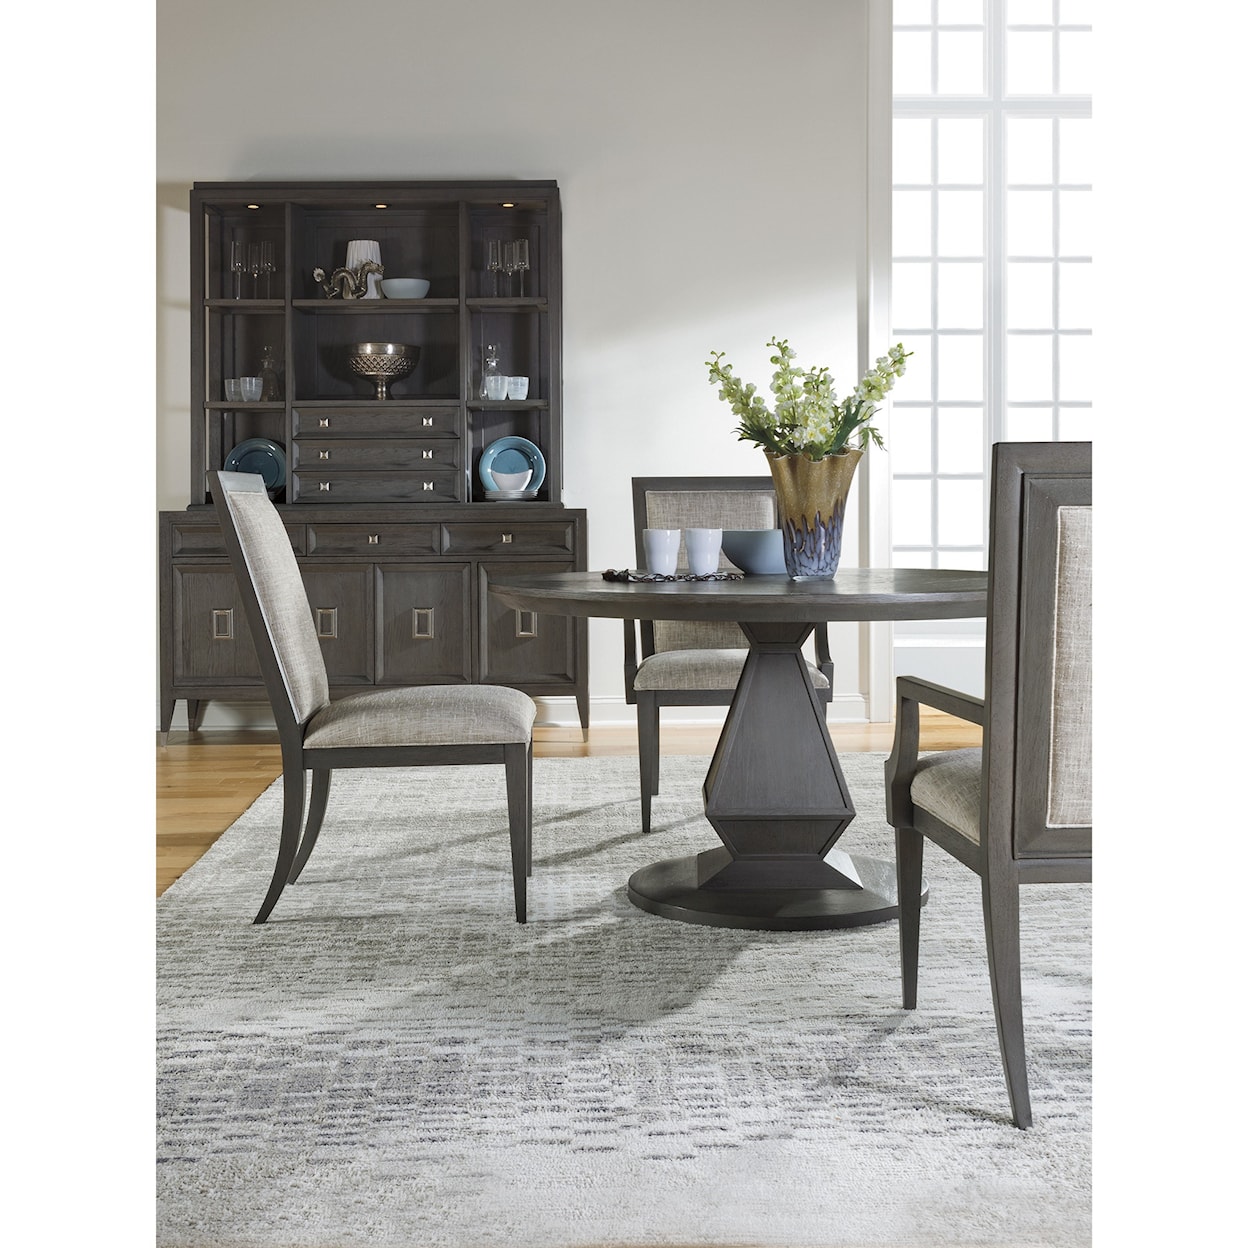 Artistica Appellation Round Dining Table